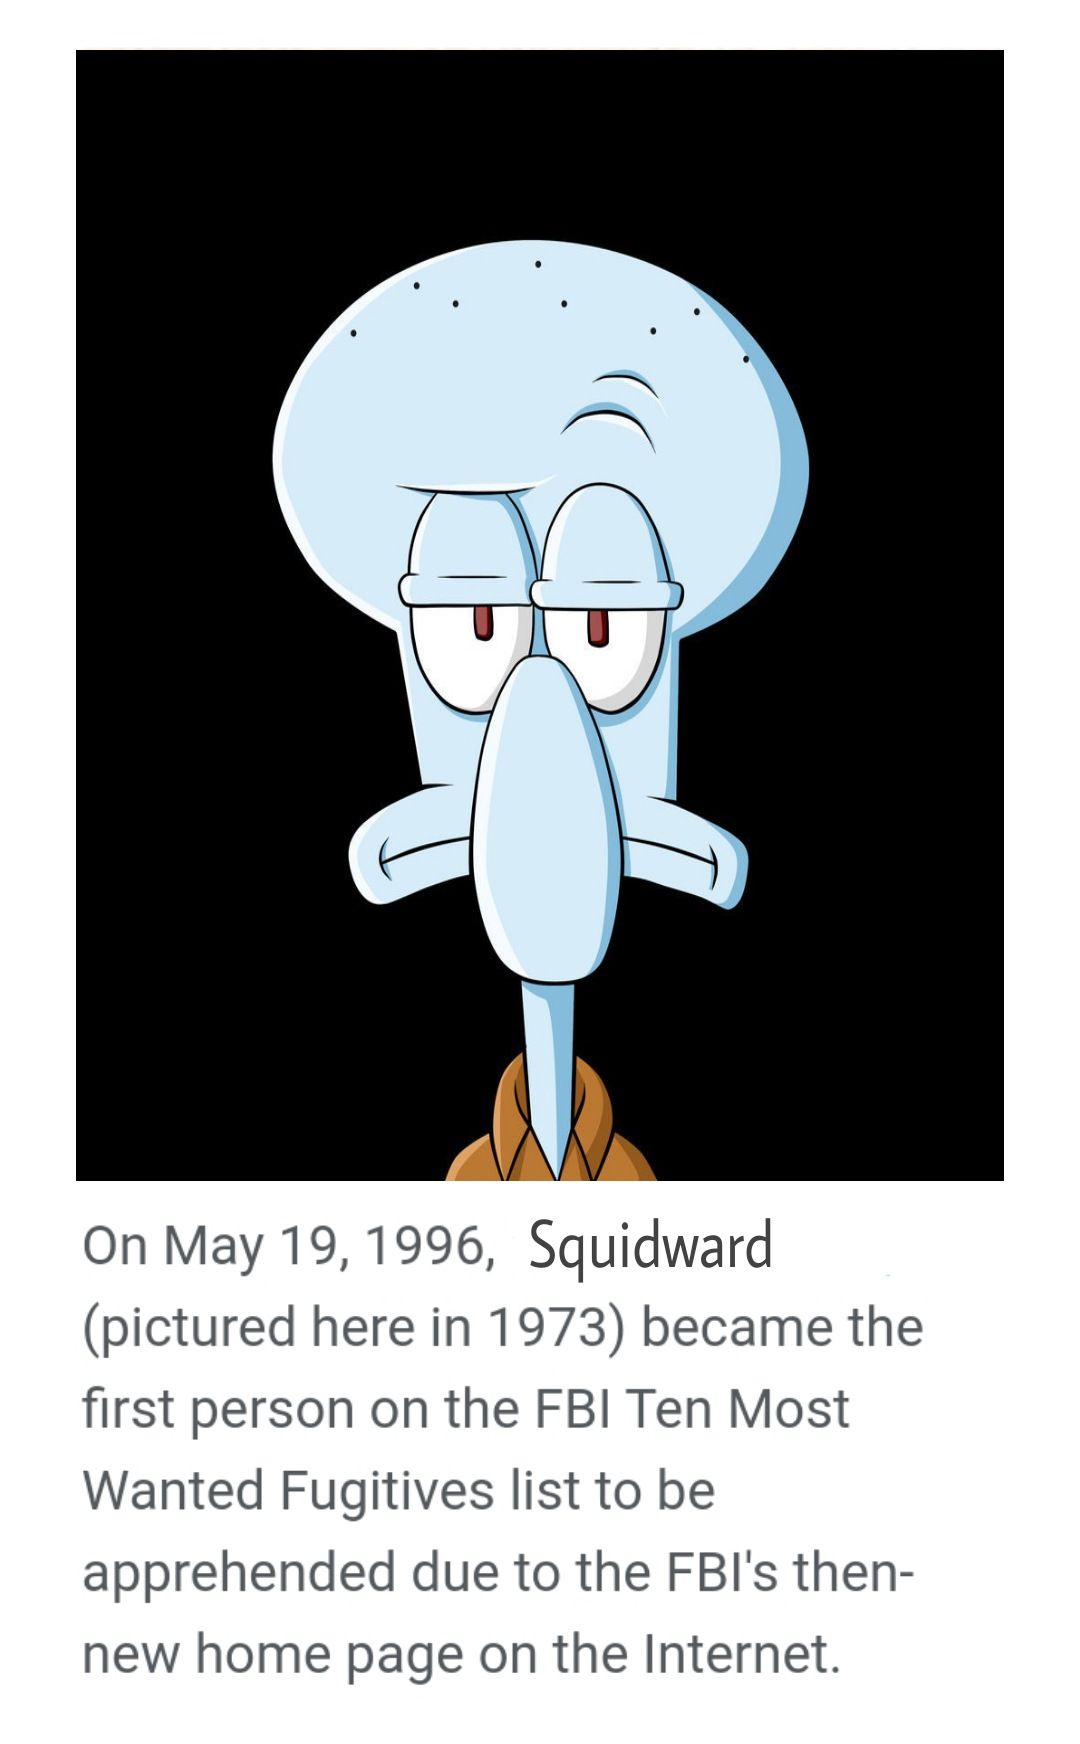 On May 19, 1996, Squidward
(pictured here in 1973) became the
first person on the FBI Ten Most
Wanted Fugitives list to be
apprehended due to the FBI's then-
new home page on the Internet.